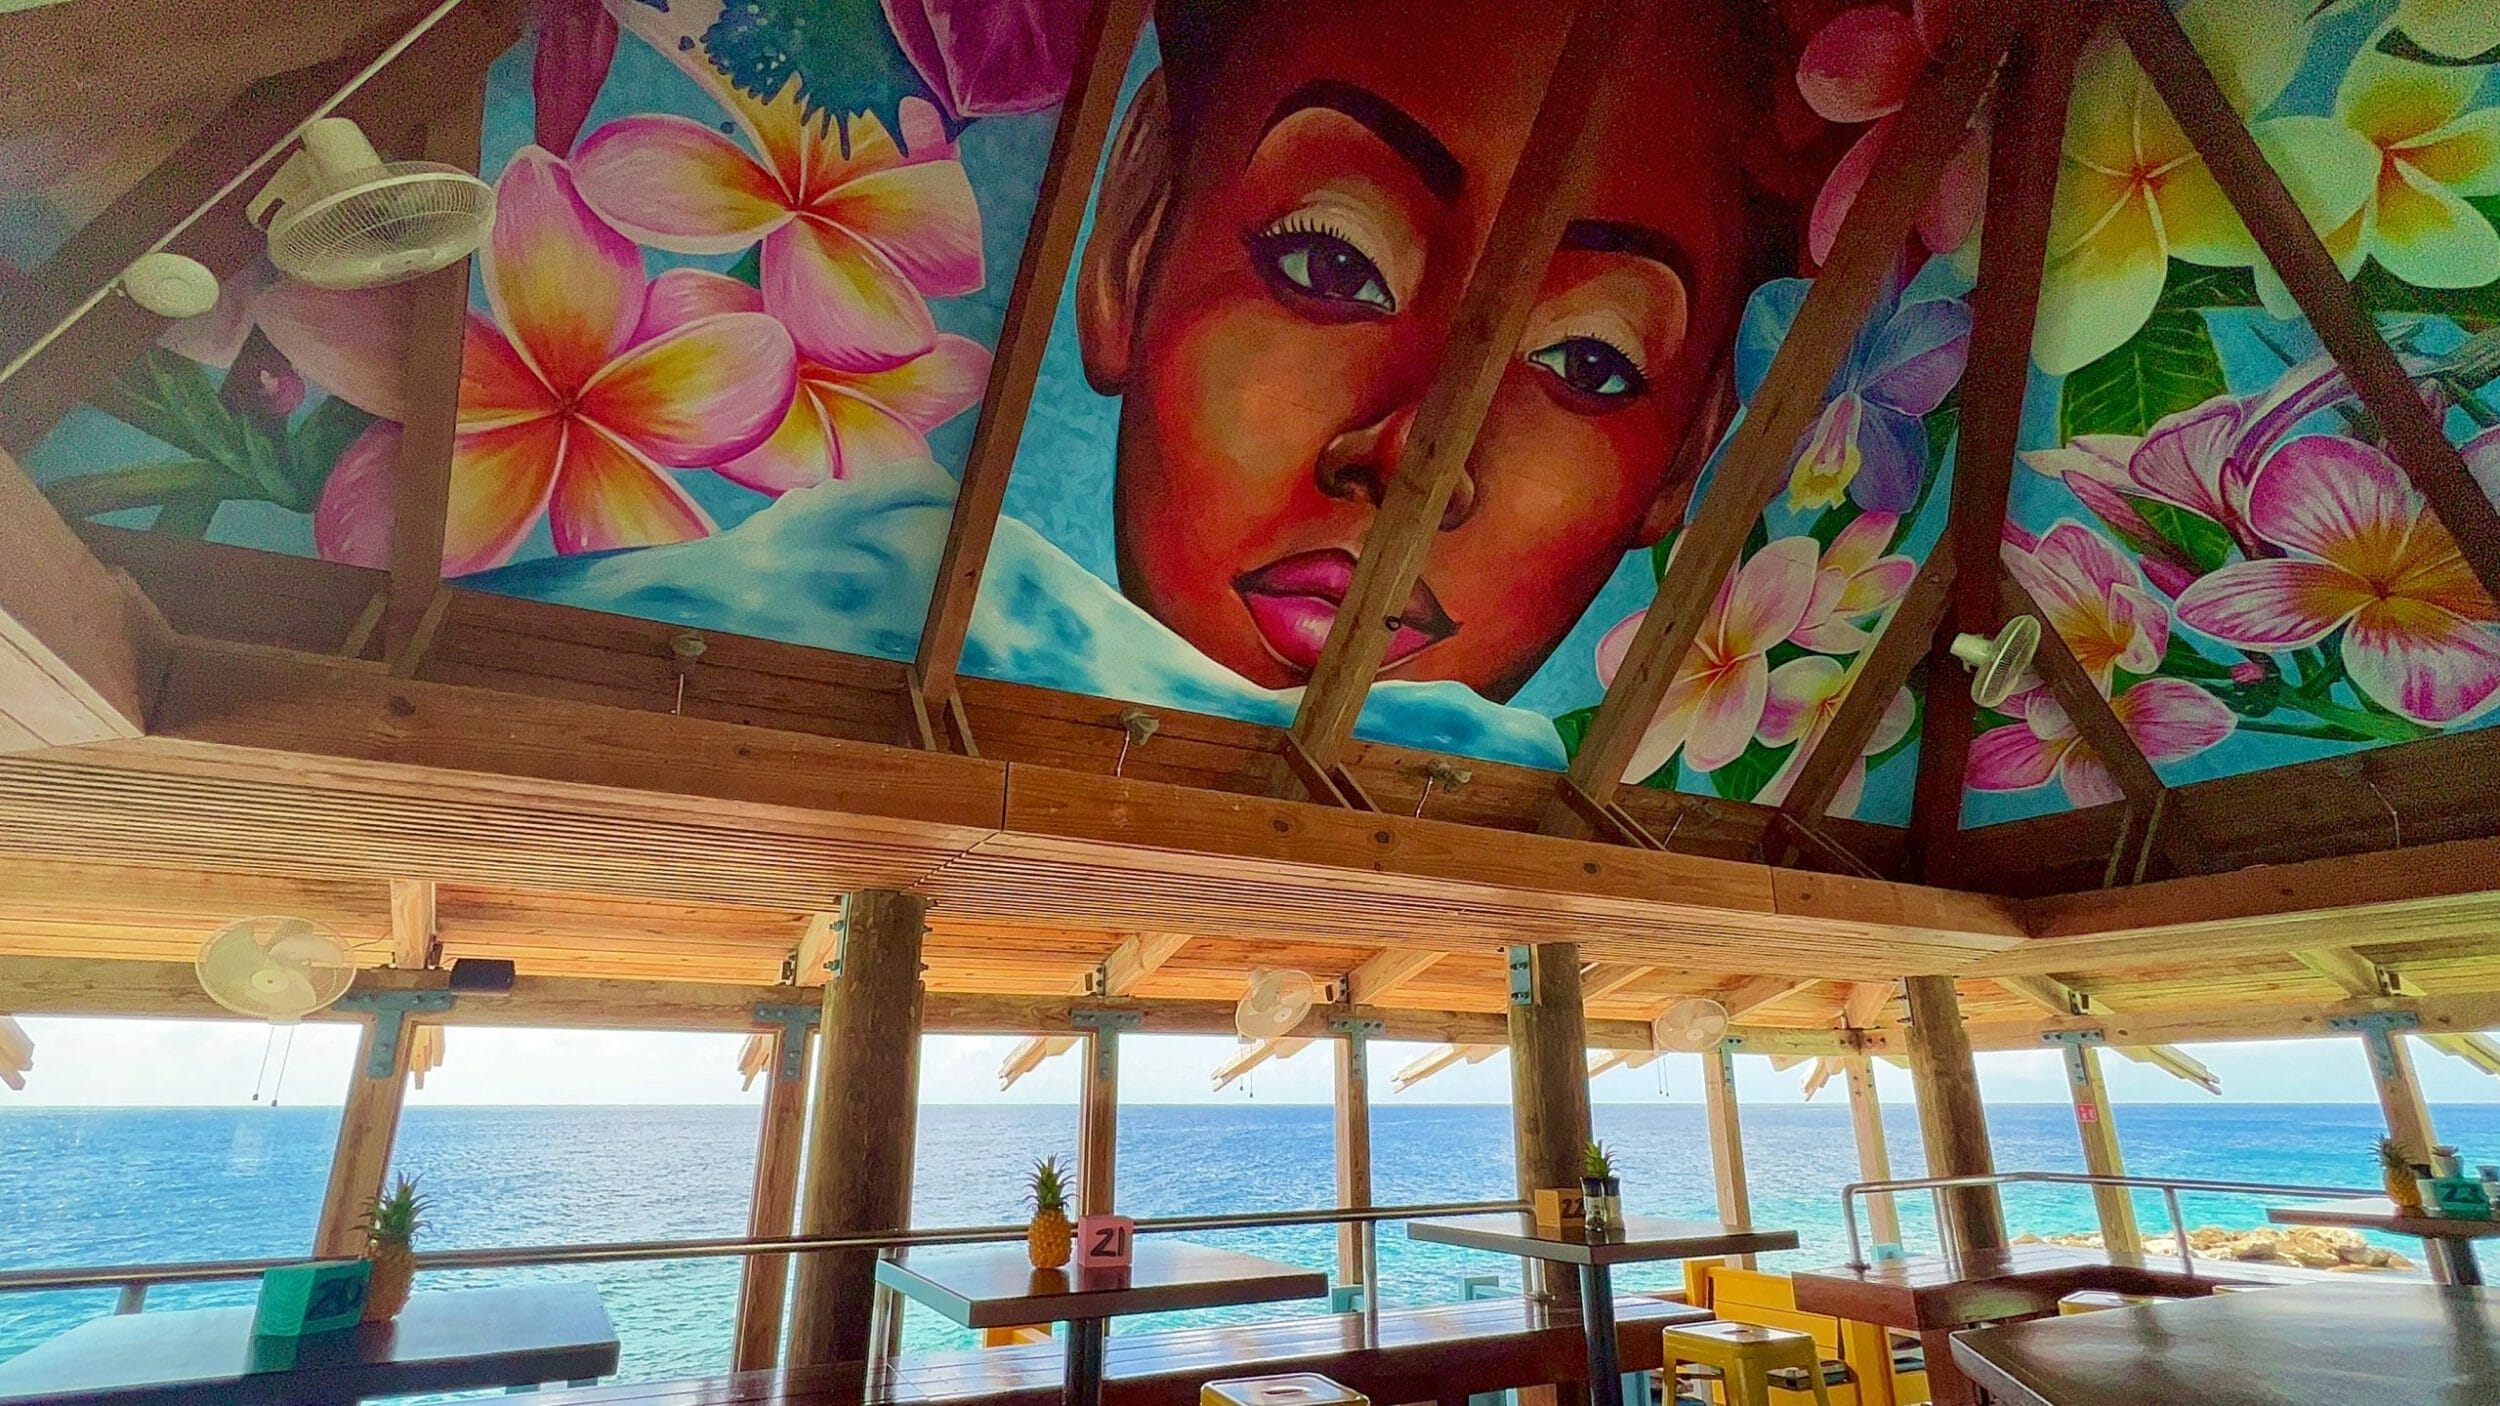 Avilas Art Curacaos biggest indoor mural at Blues Restaurant scaled